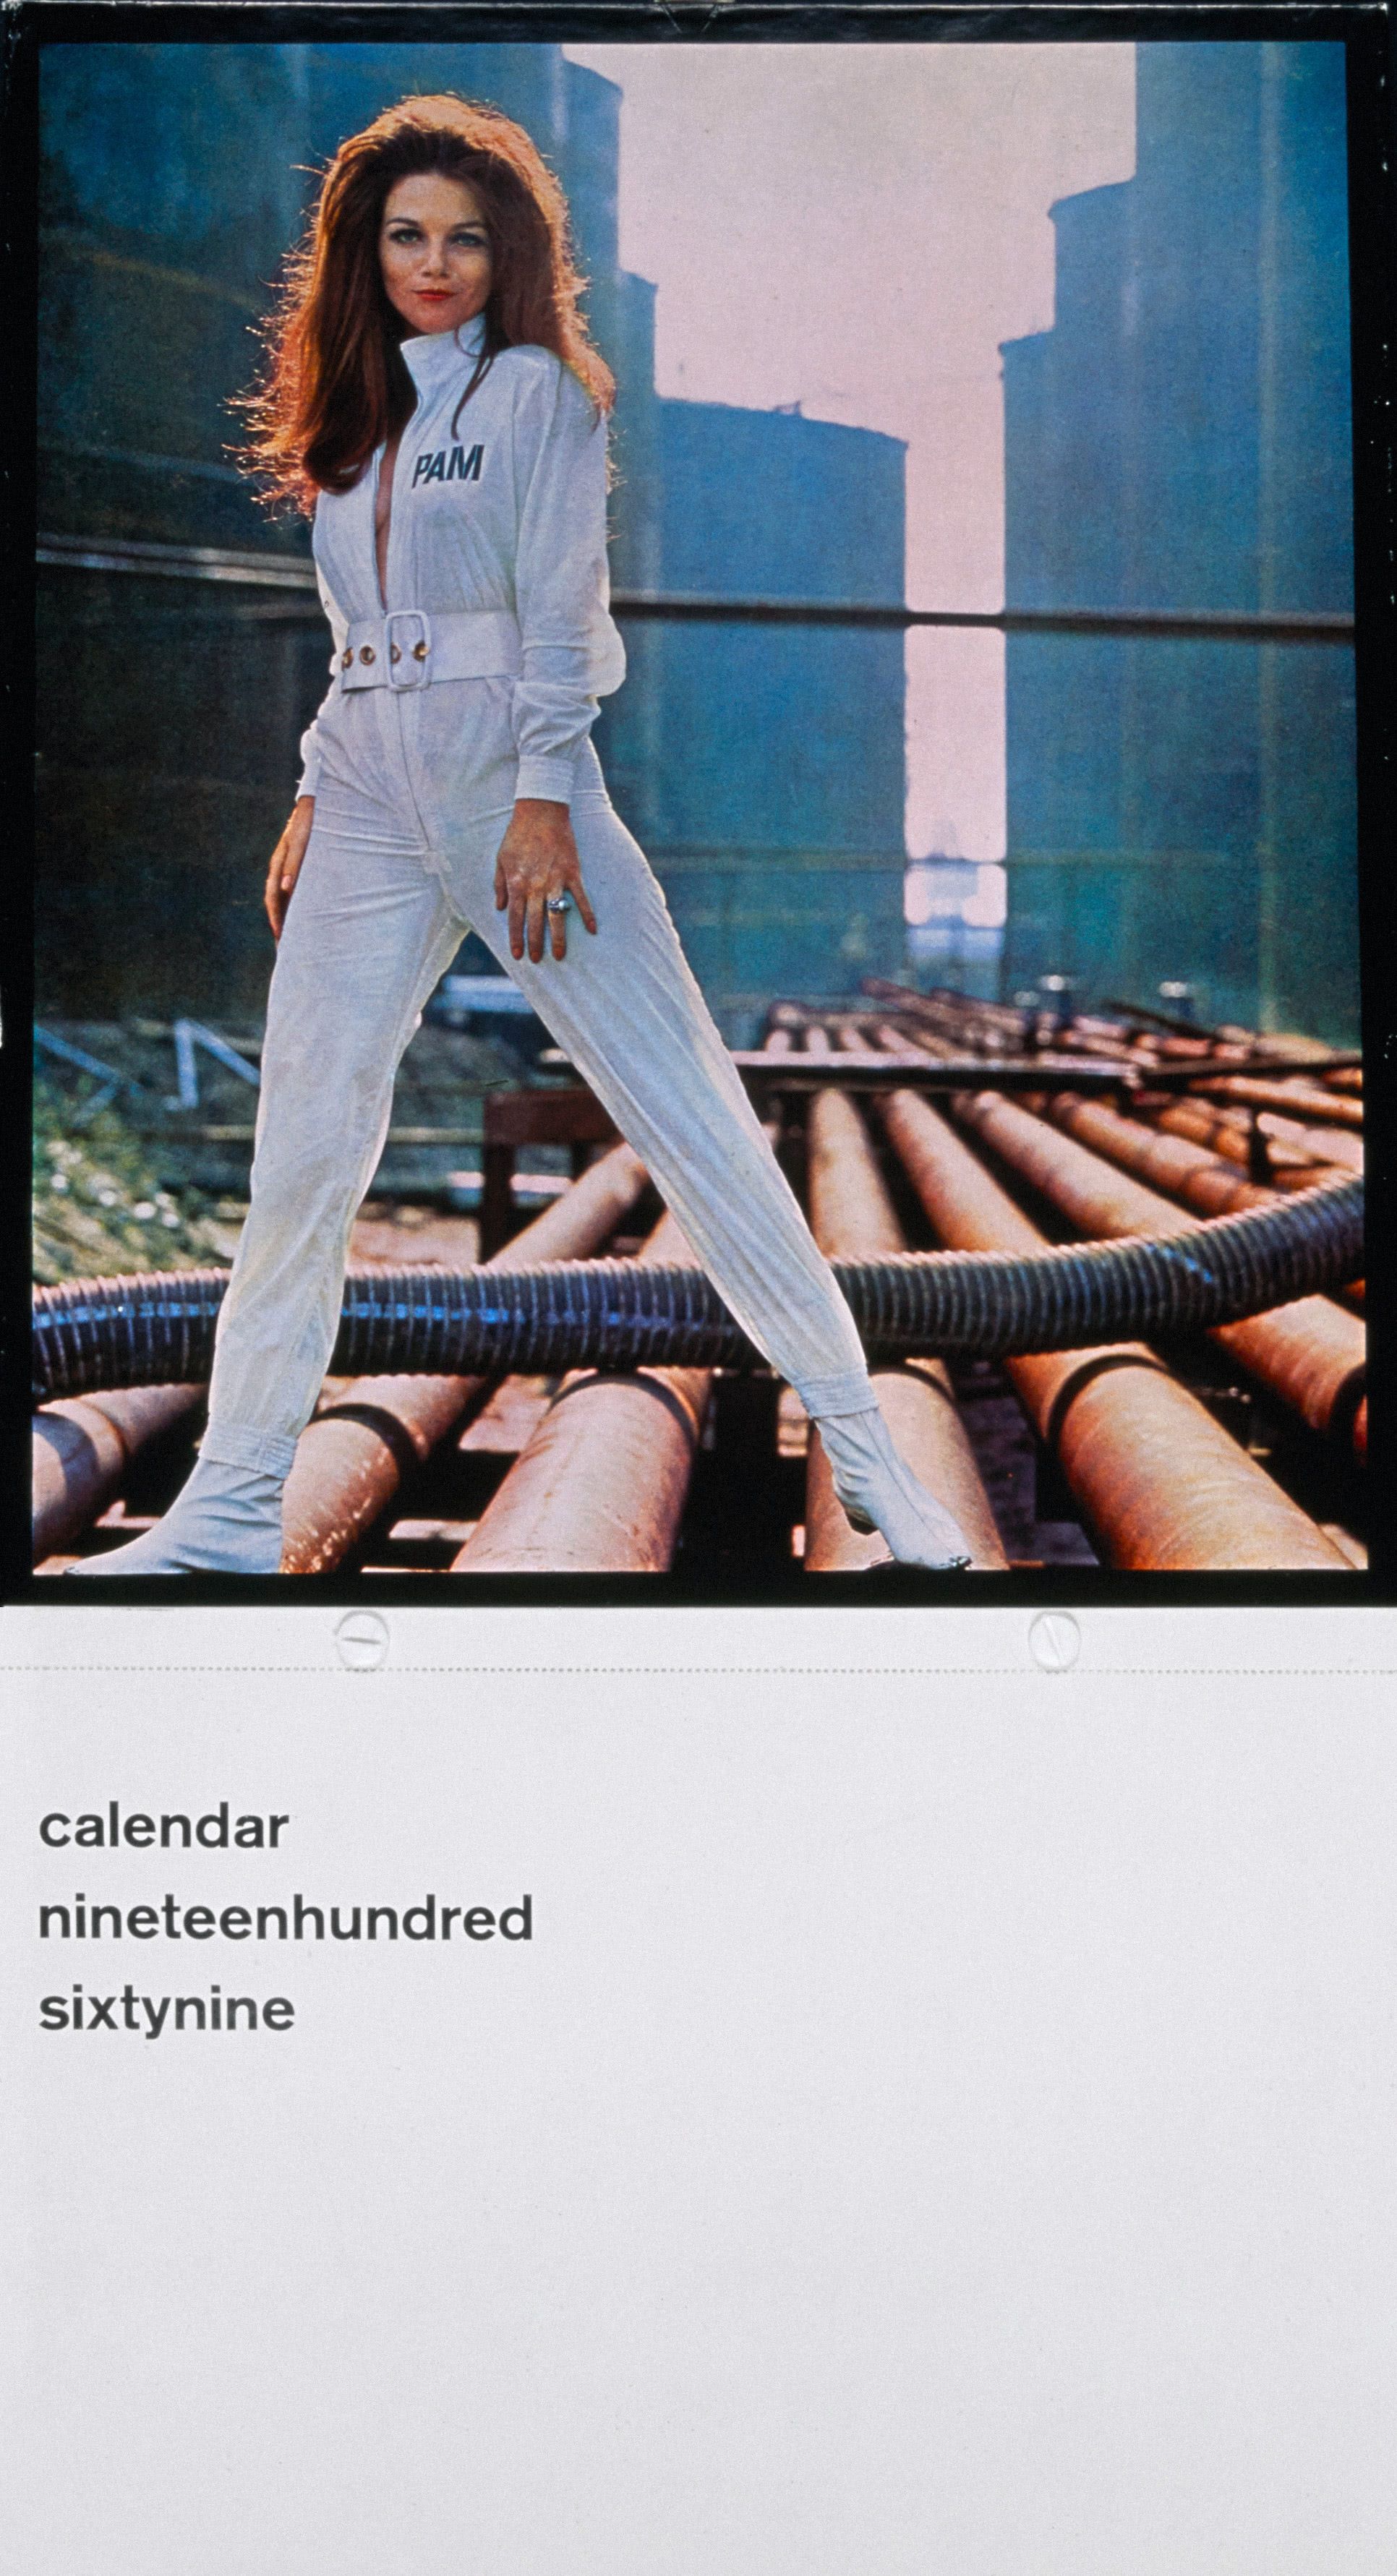 The 1969 PAM calendar, designed for personnel and regular customers and featuring images shot by the renowned photographer Paul Huf.